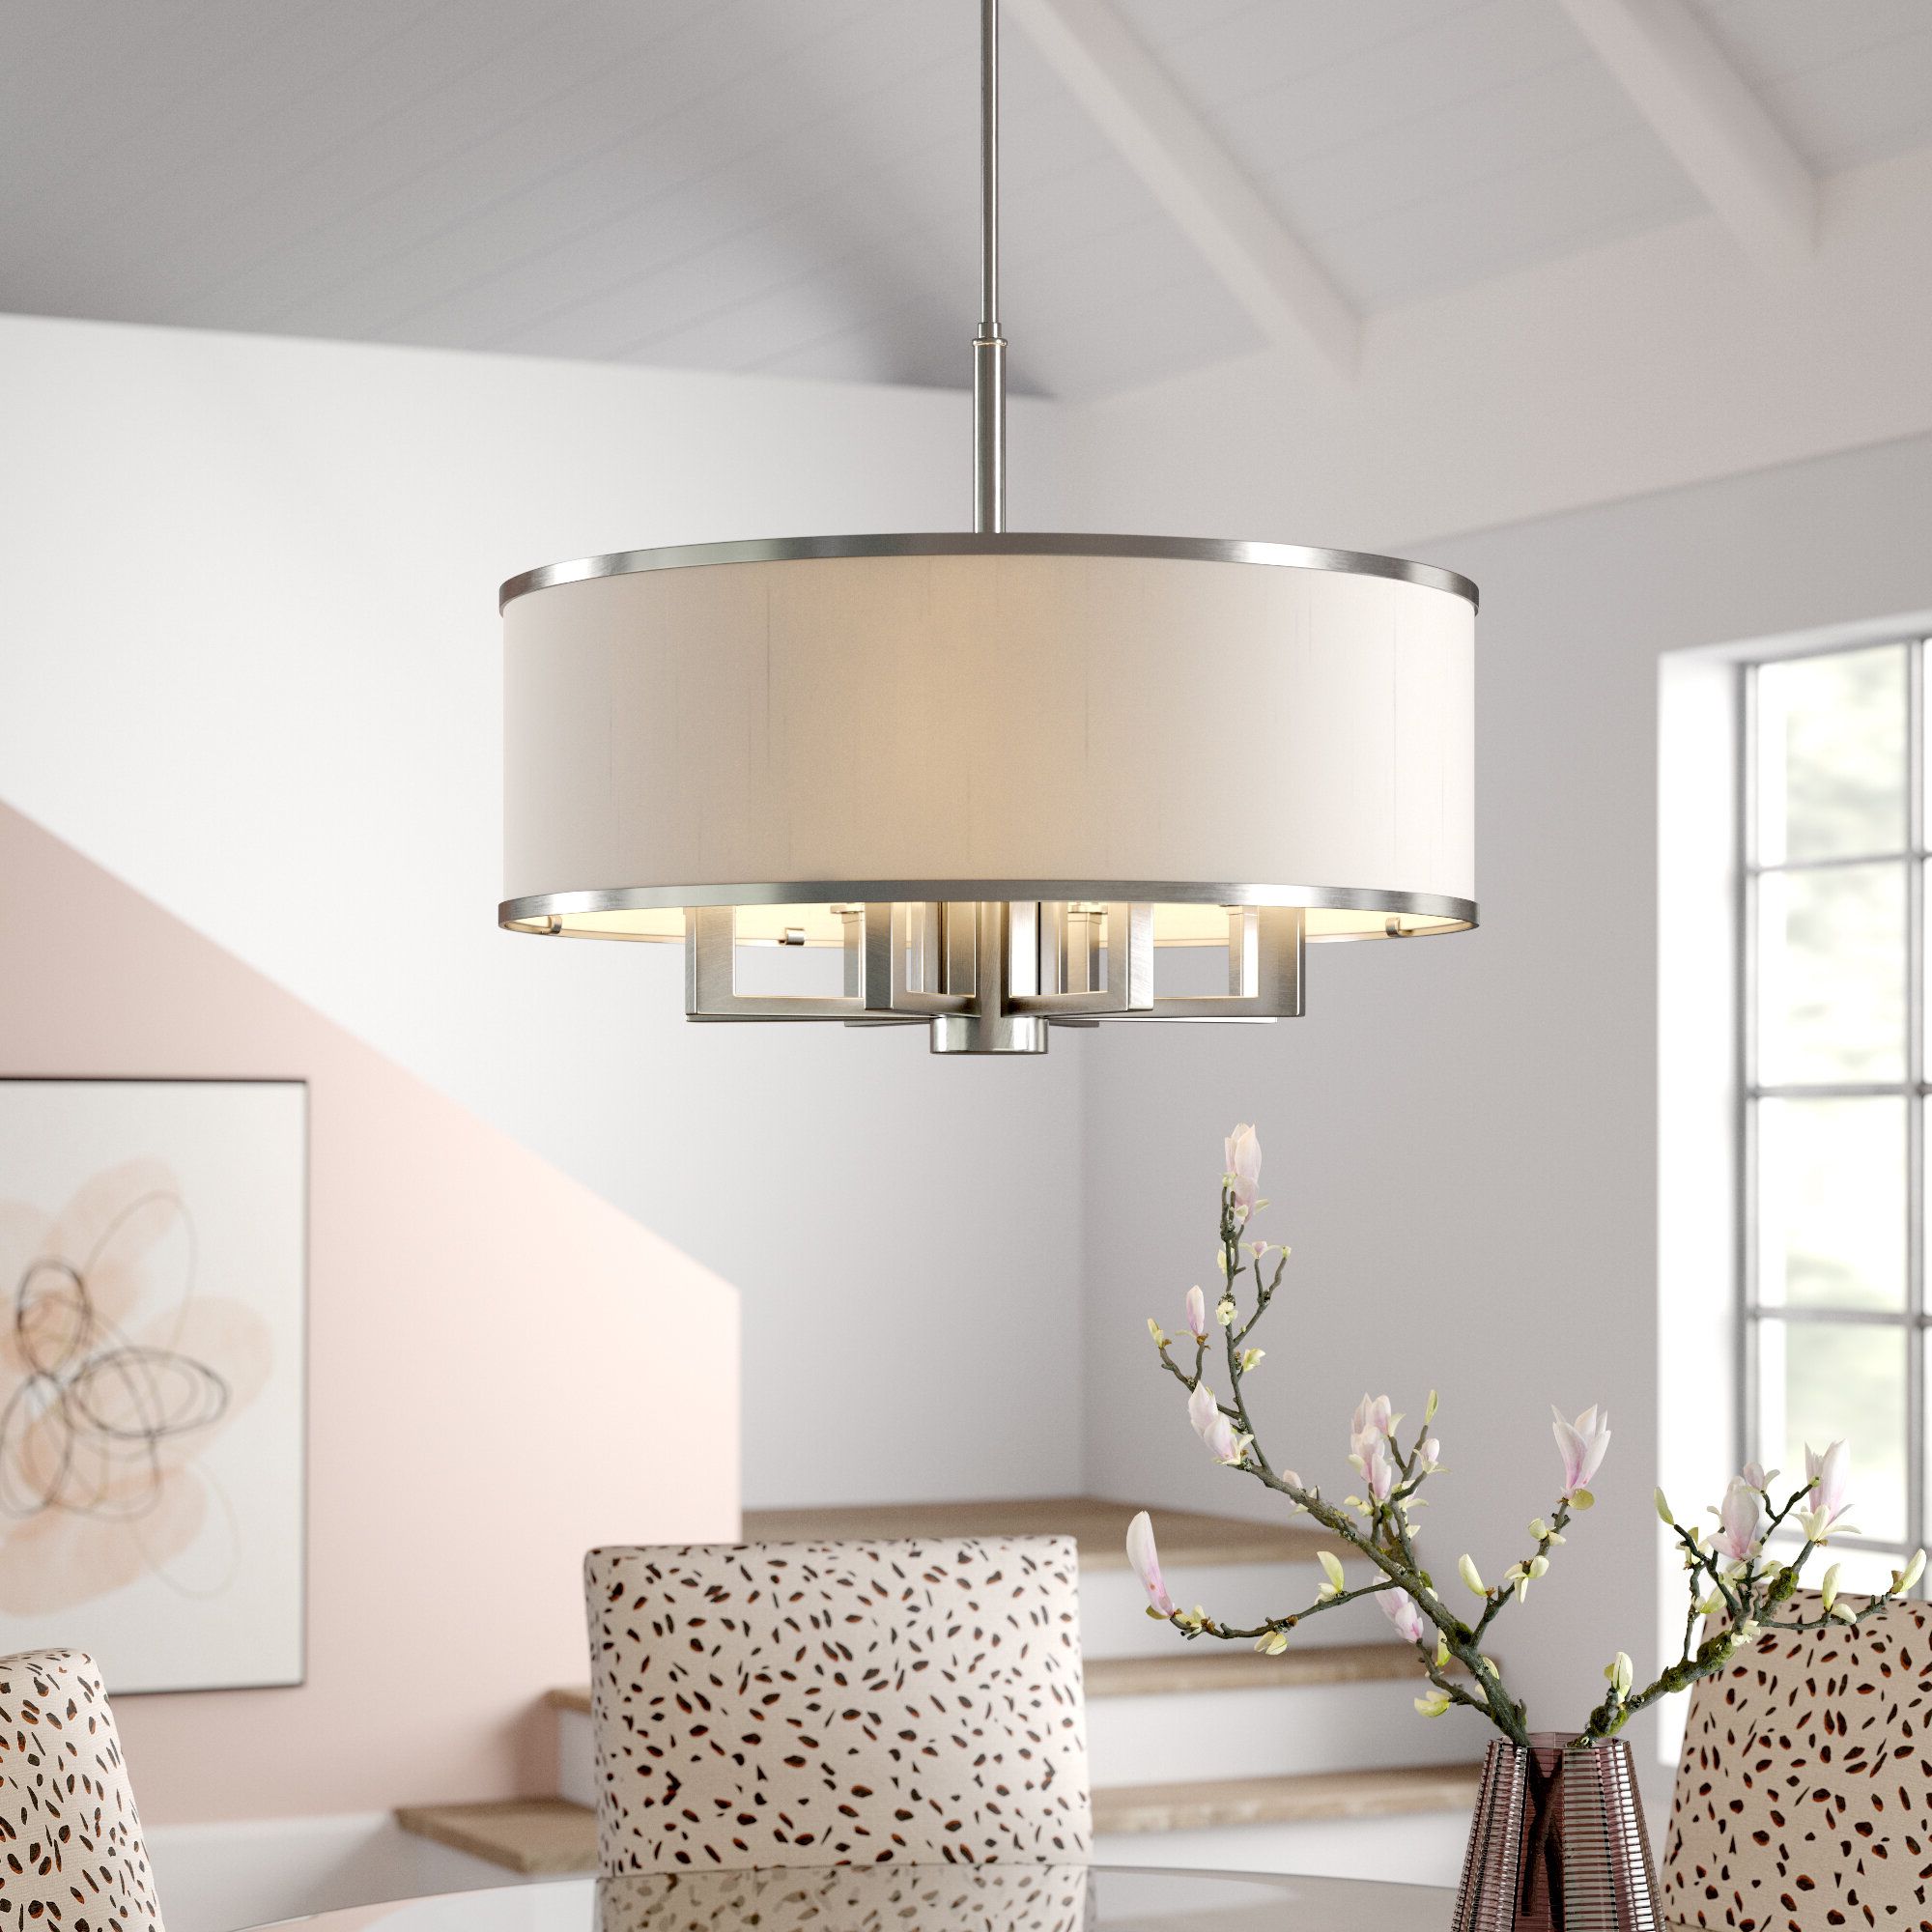 Montes 3 Light Drum Chandeliers Pertaining To Well Known Breithaup 7 Light Drum Chandelier (View 17 of 25)